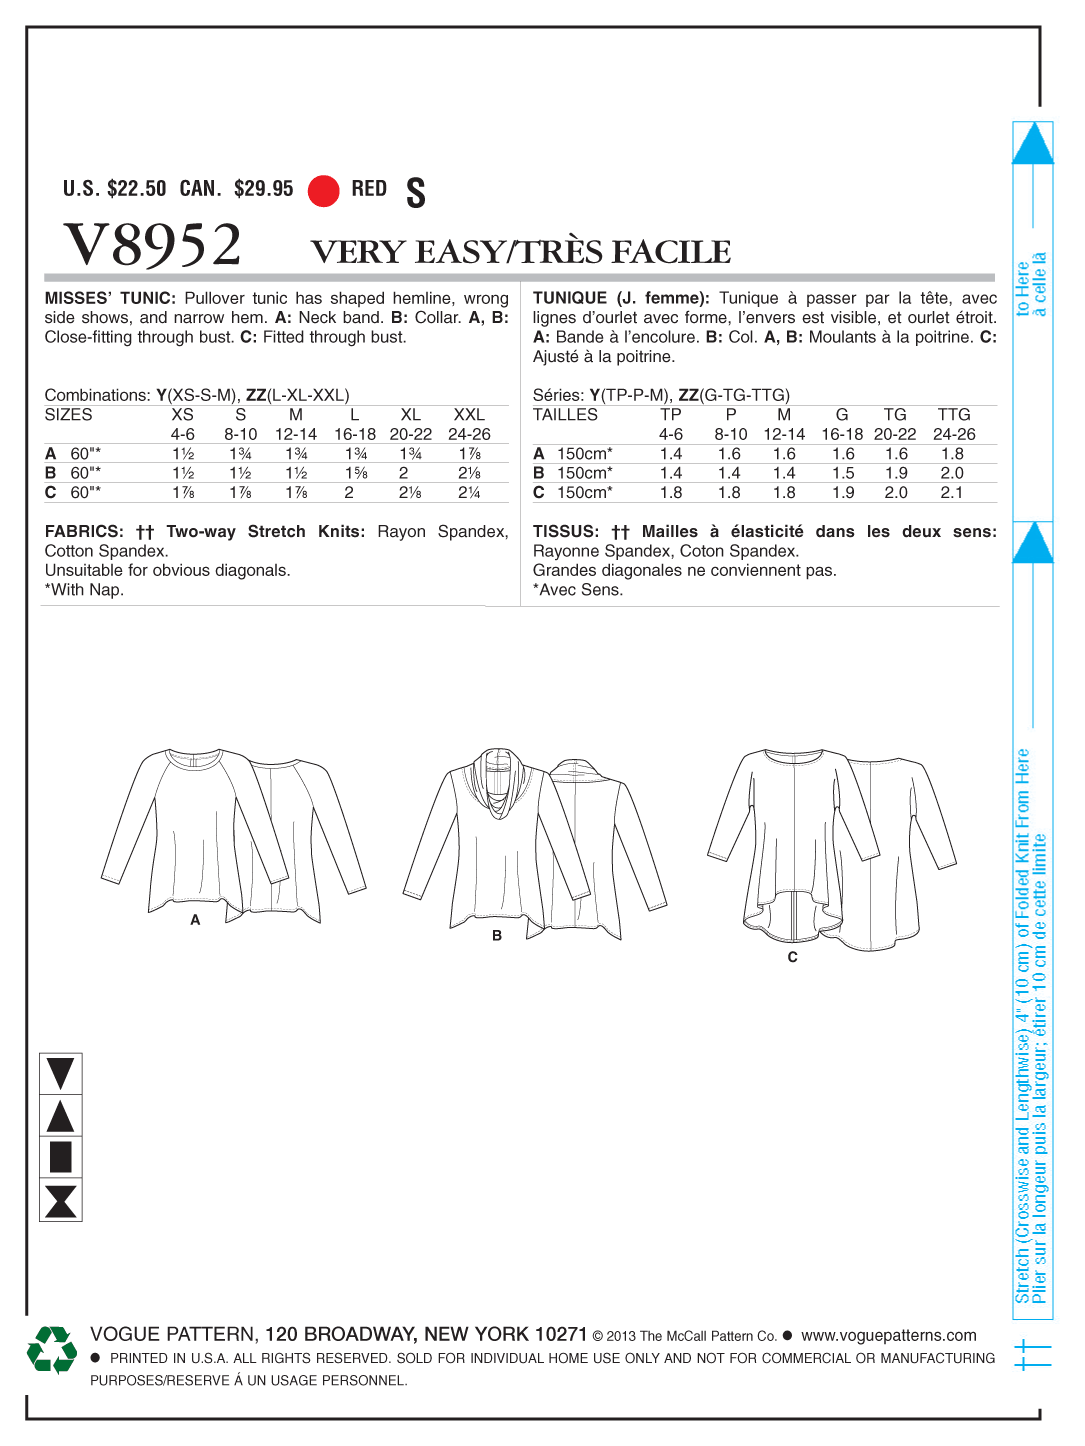 Vogue Pattern 8952 Misses' tunic from Jaycotts Sewing Supplies